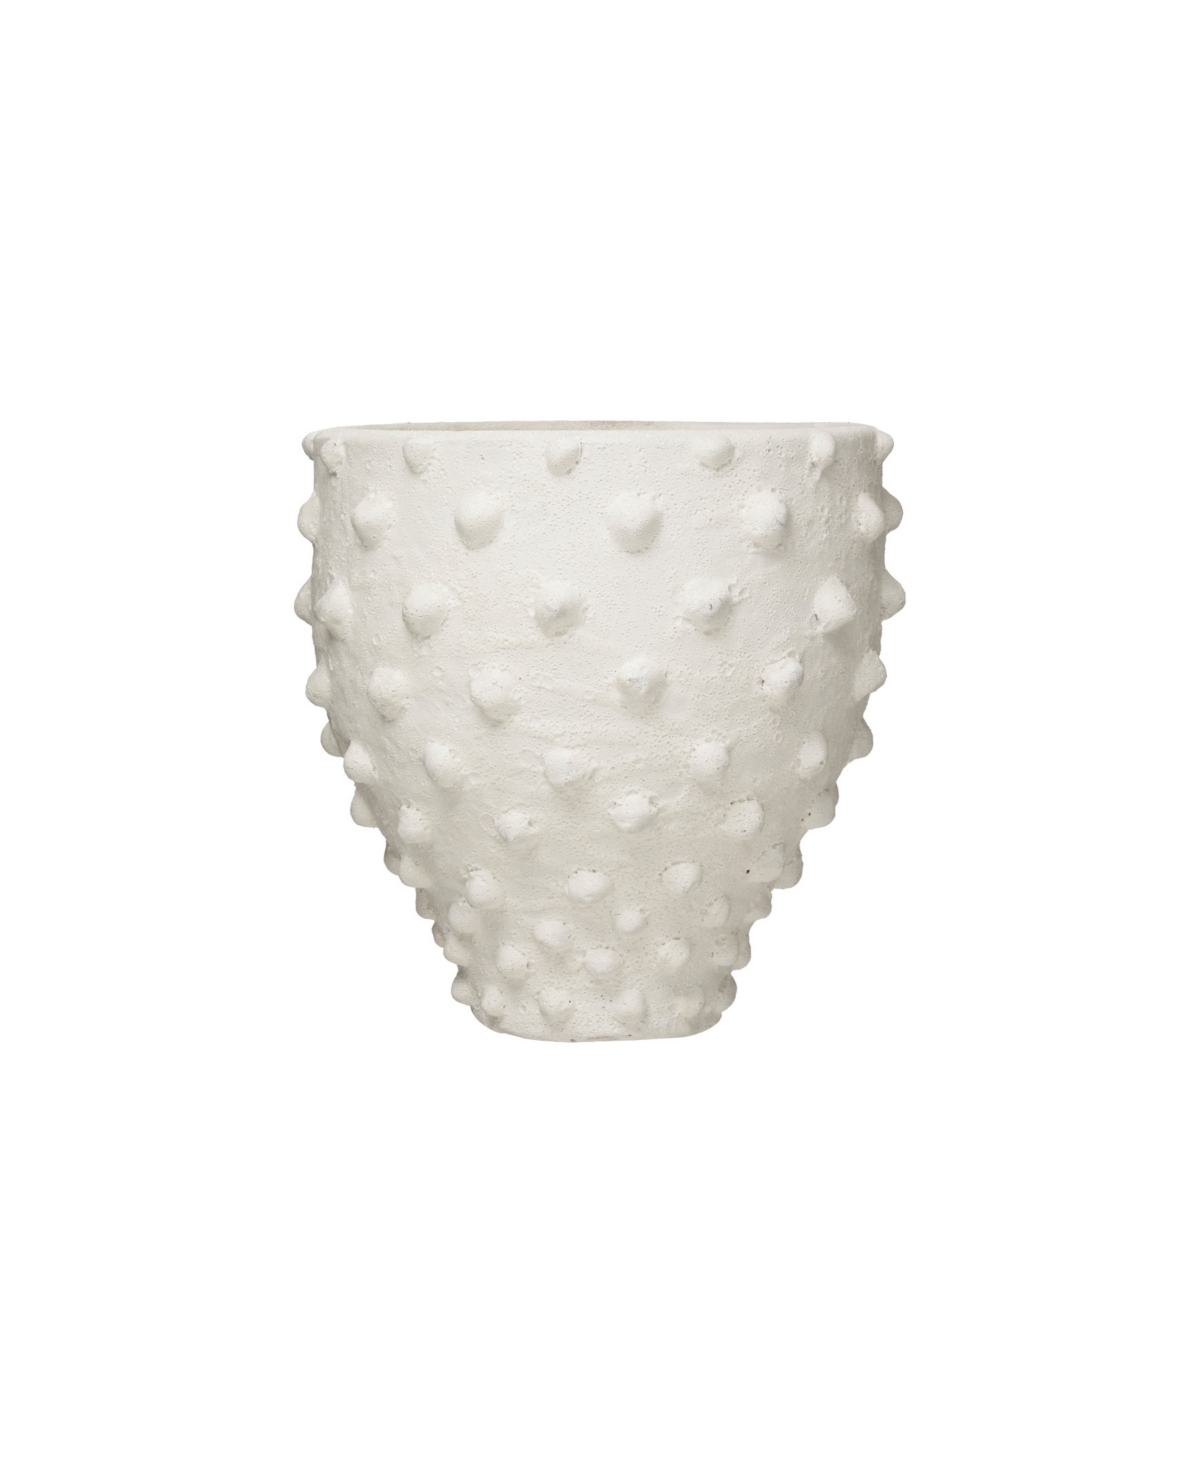 9.75"H Textured Terracotta Planter with Pointed Polka Dot Design Hold - White